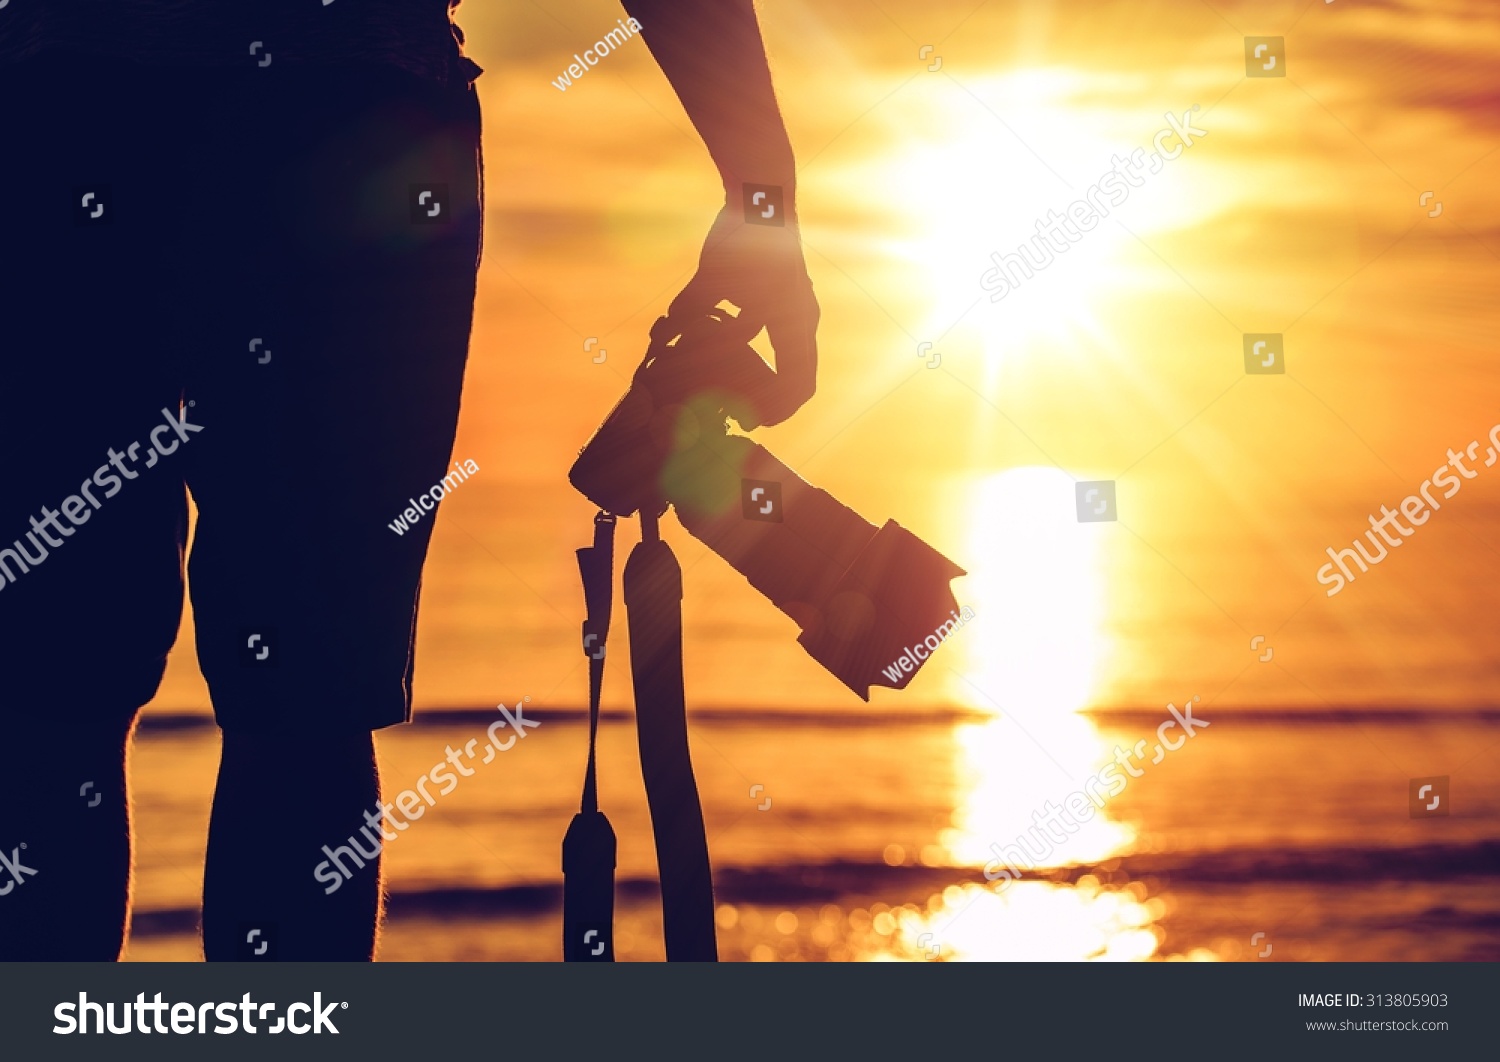 Sunset Photography. Photographer Ready to Take Sunset Pictures on the Beach. Professional Travel Photography Works. #313805903